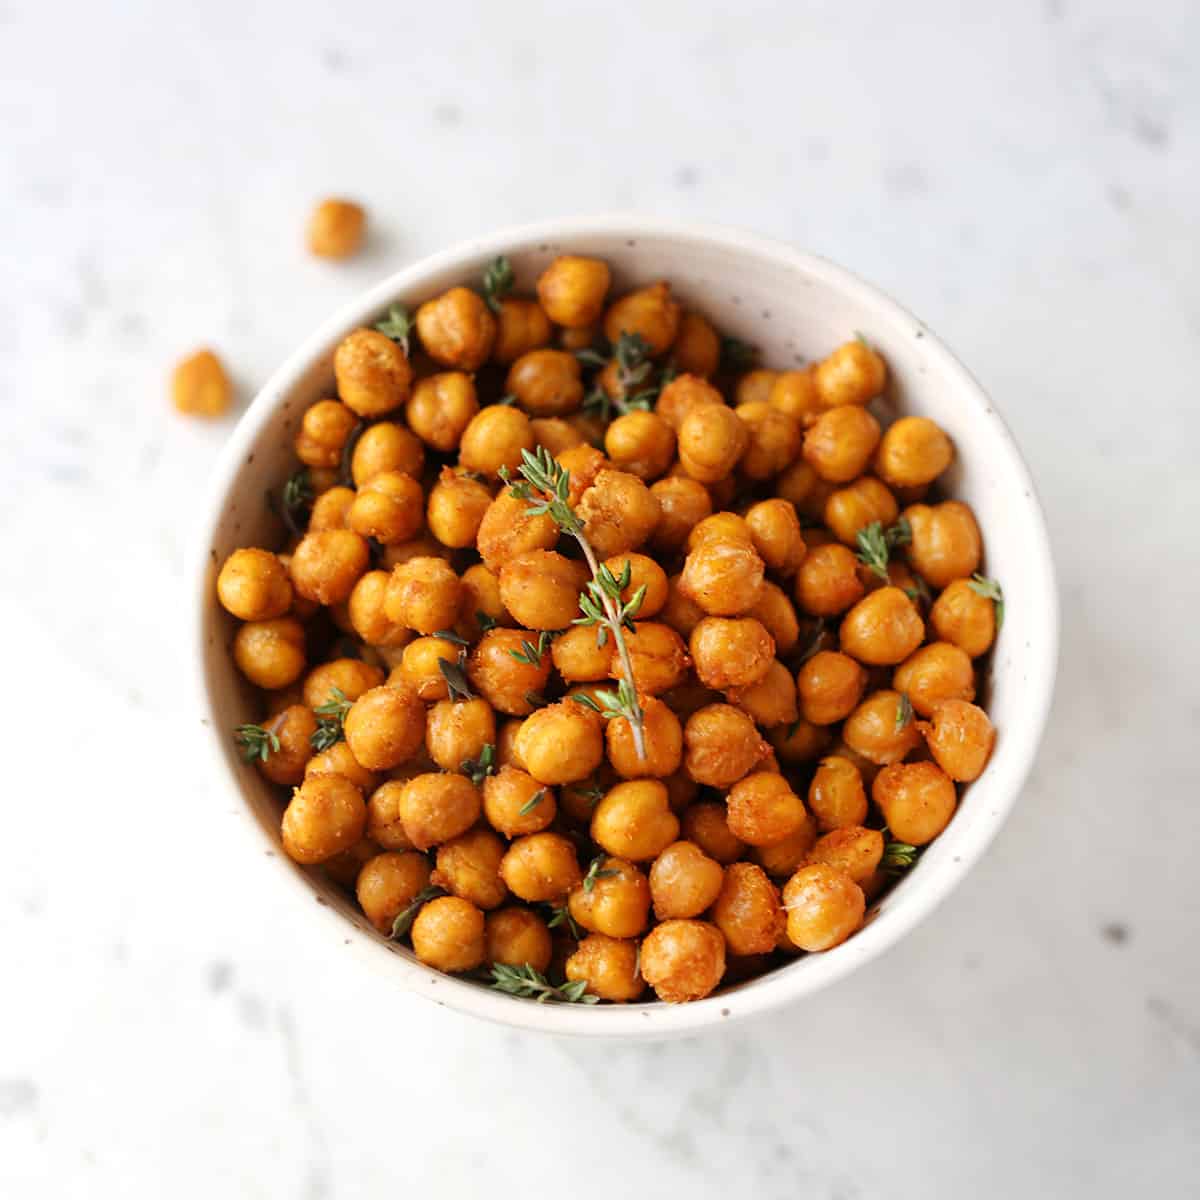 Fried chickpeas in a bowl or in the air